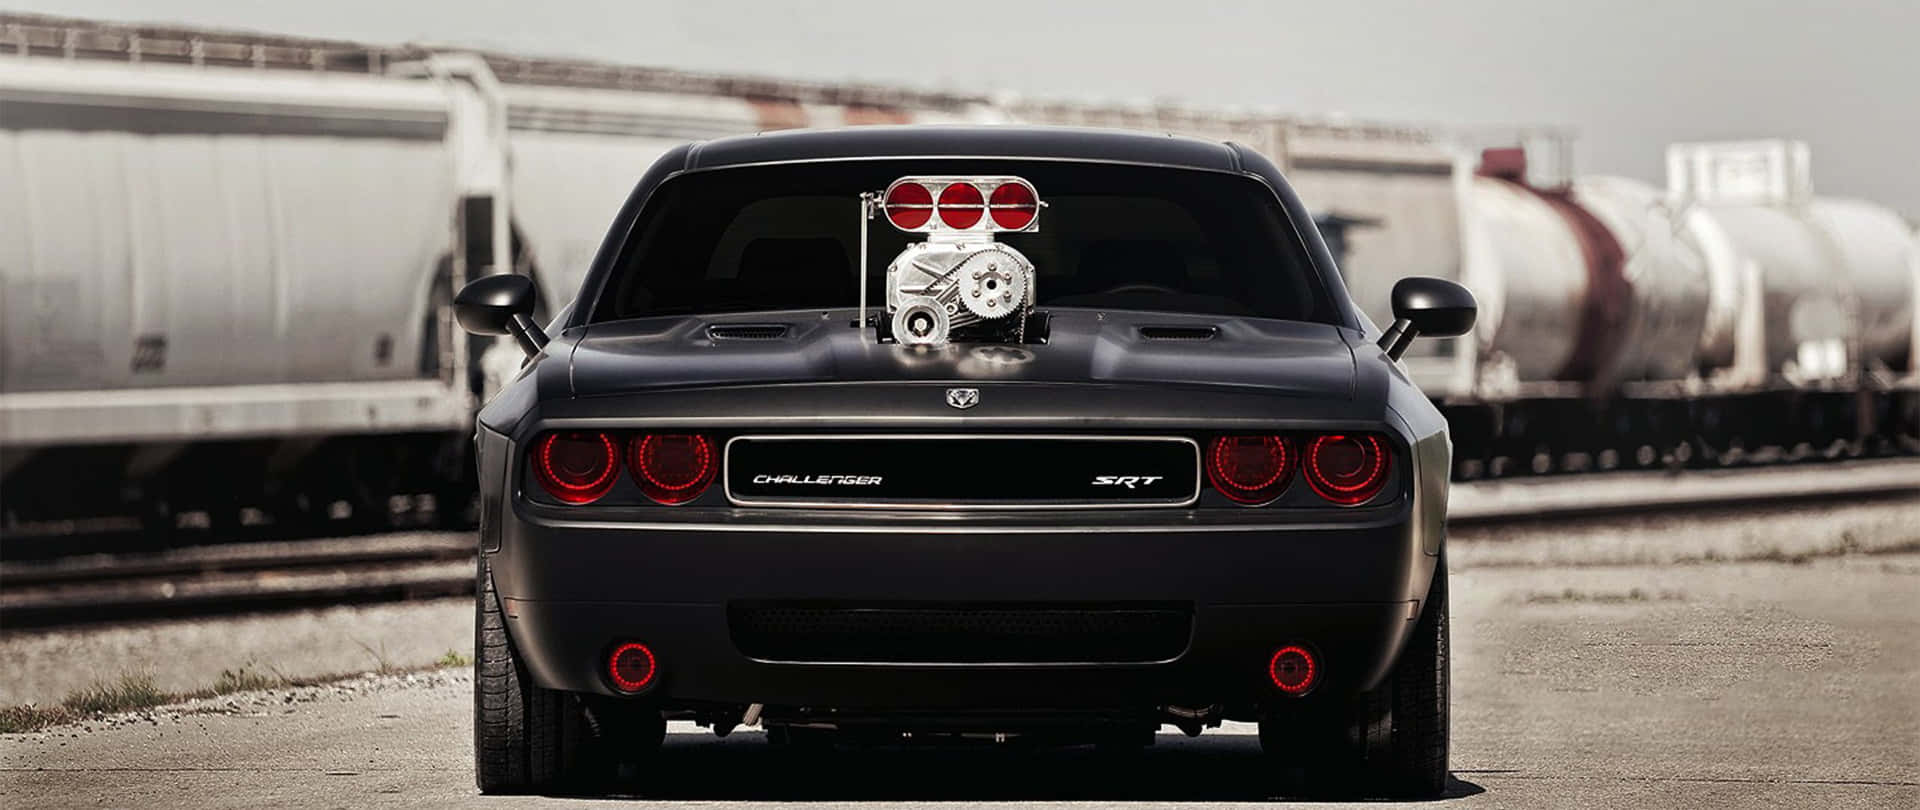 "Dominate the road with Dodge's Hellcat" Wallpaper